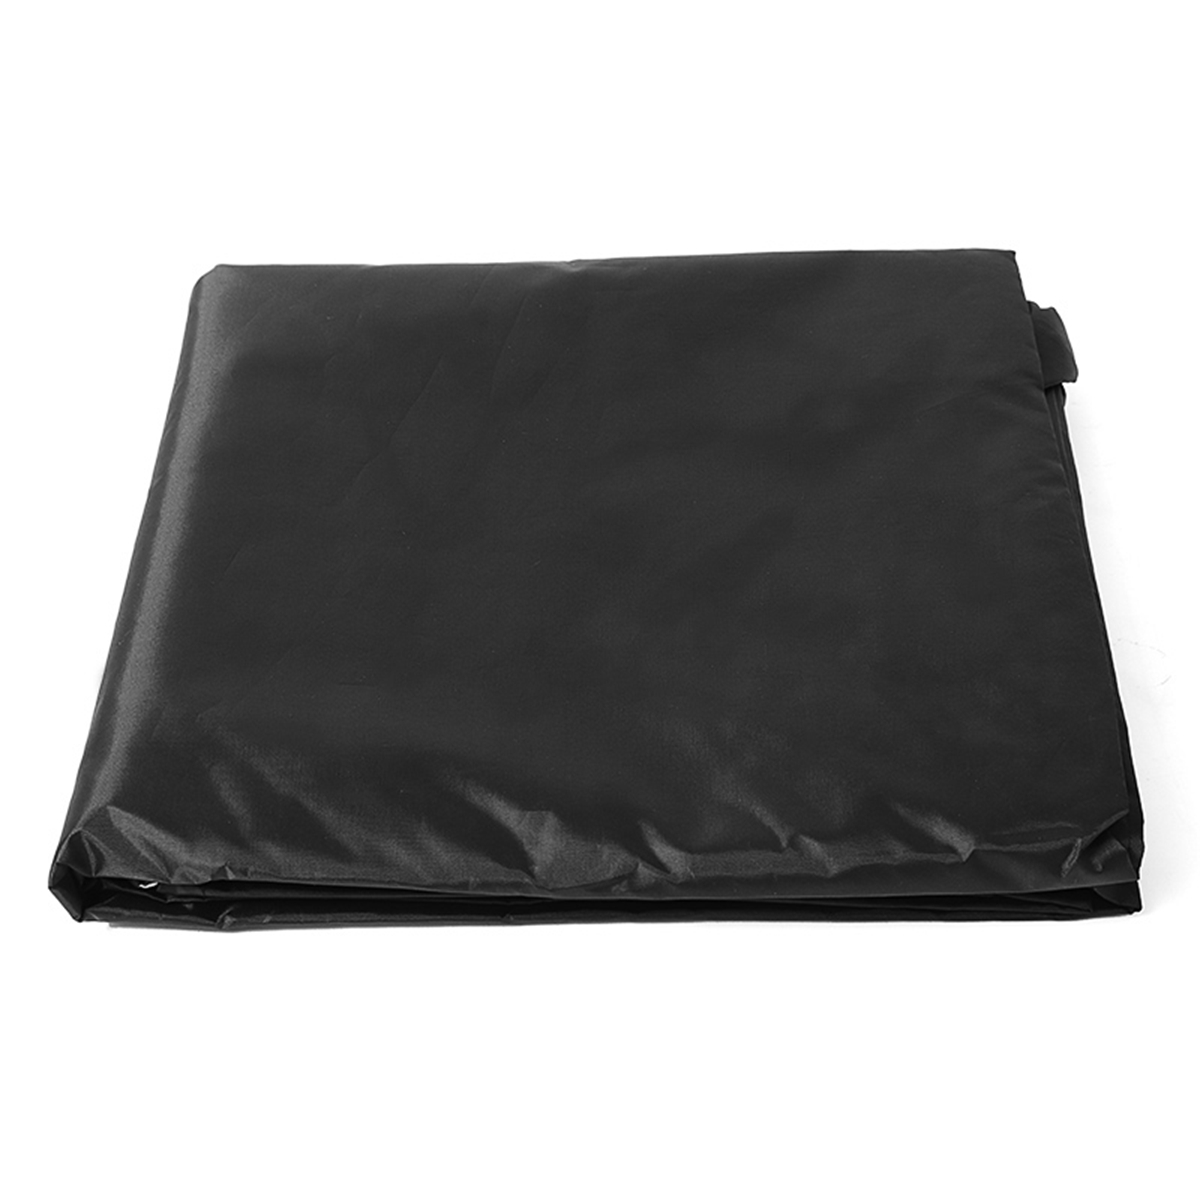 Multi-Size-Snooker-Billiard-Table-Cover-Polyester-Waterproof-Fabric-Outdoor-Pool-1440471-2